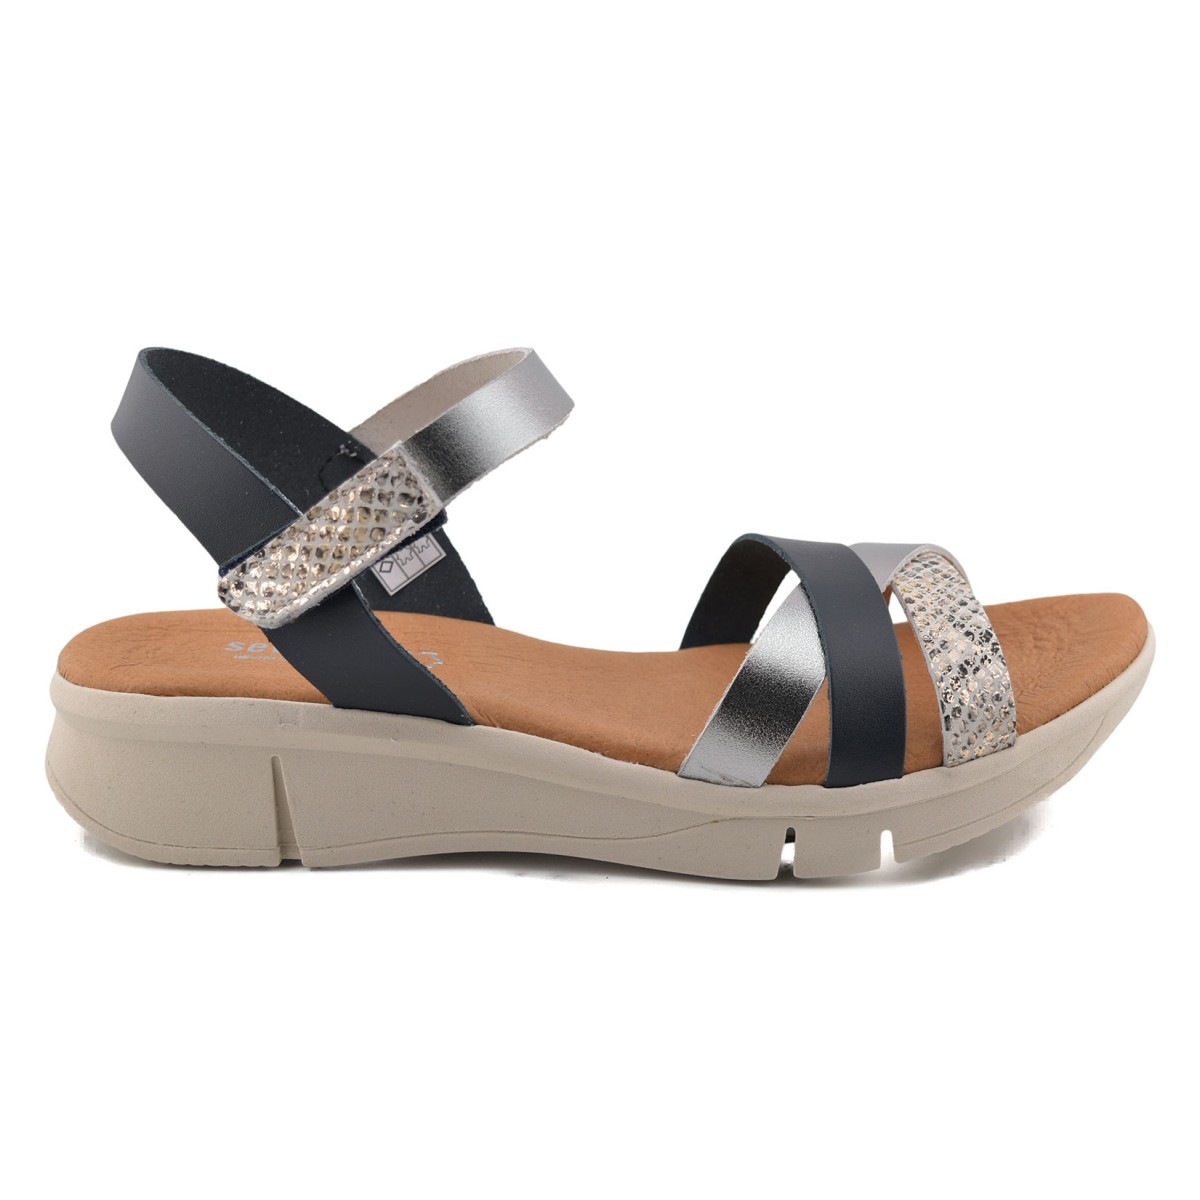 Marine and silver leather sandals by CBP